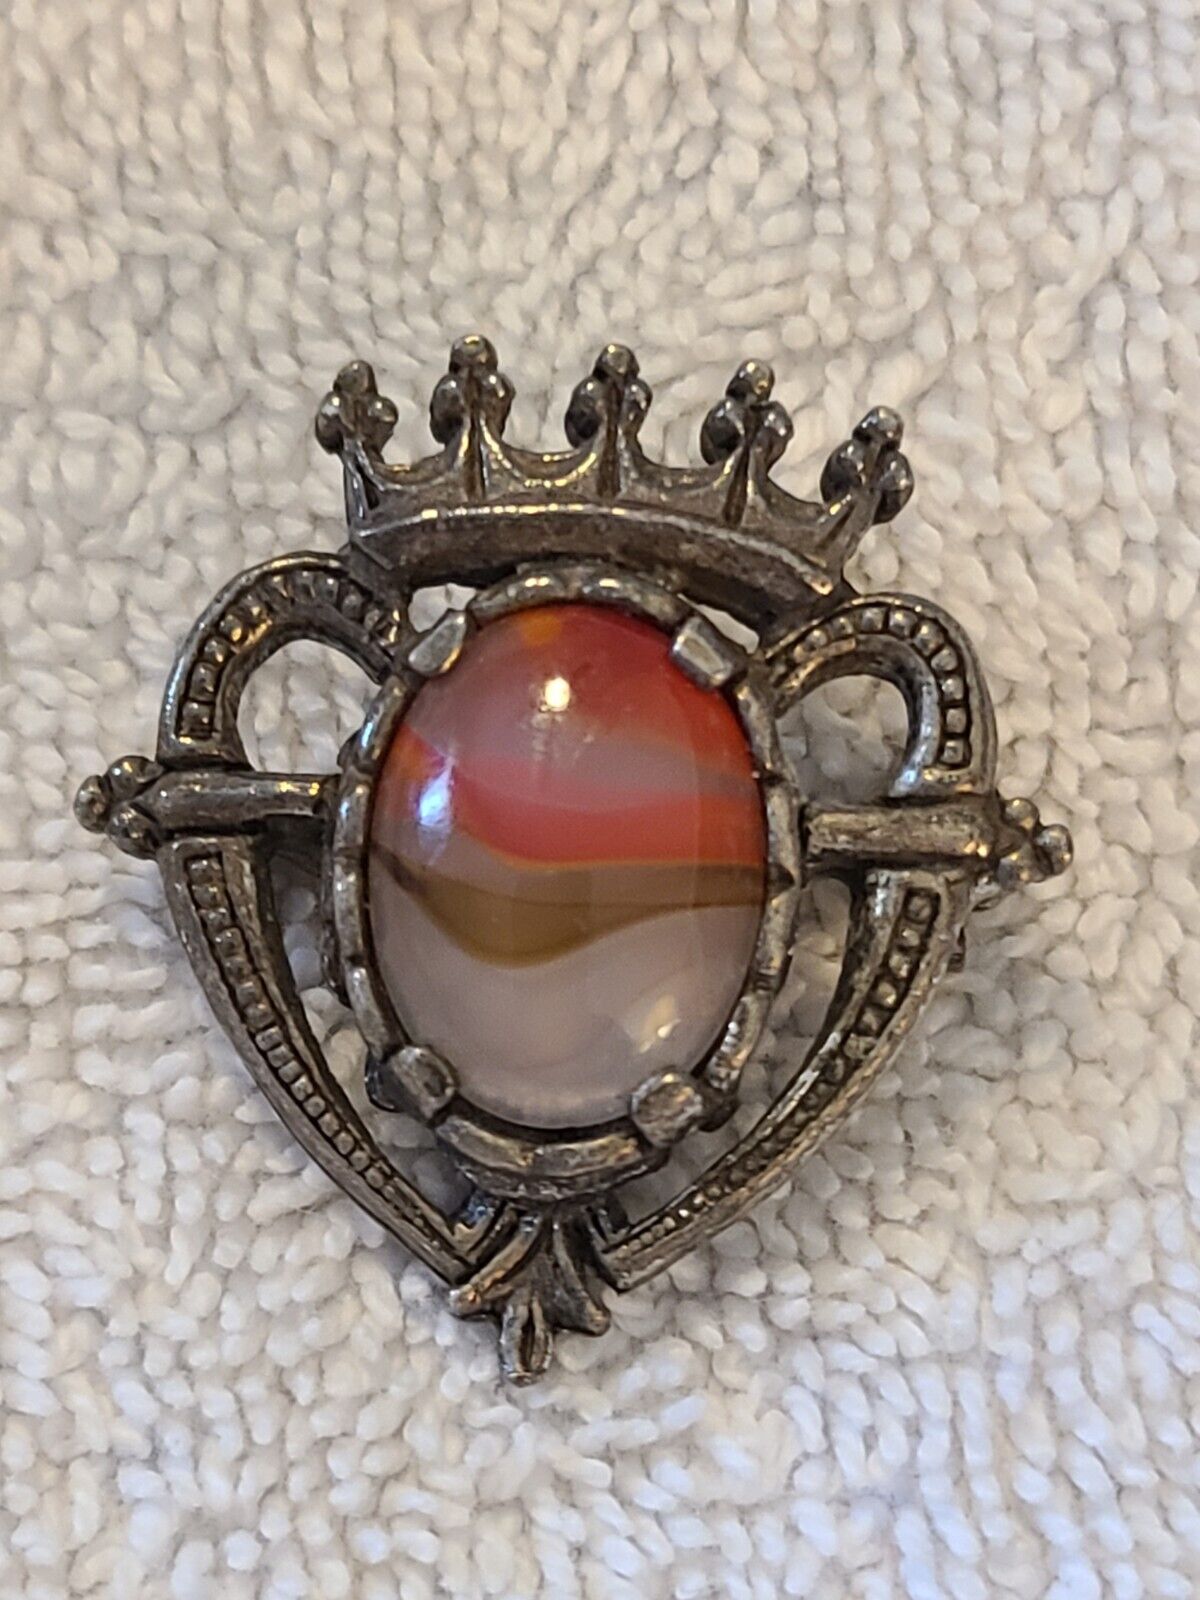 VINTAGE SILVER TONE MIRACLE CELTIC DESIGN AGATE GLASS BROOCH PIN